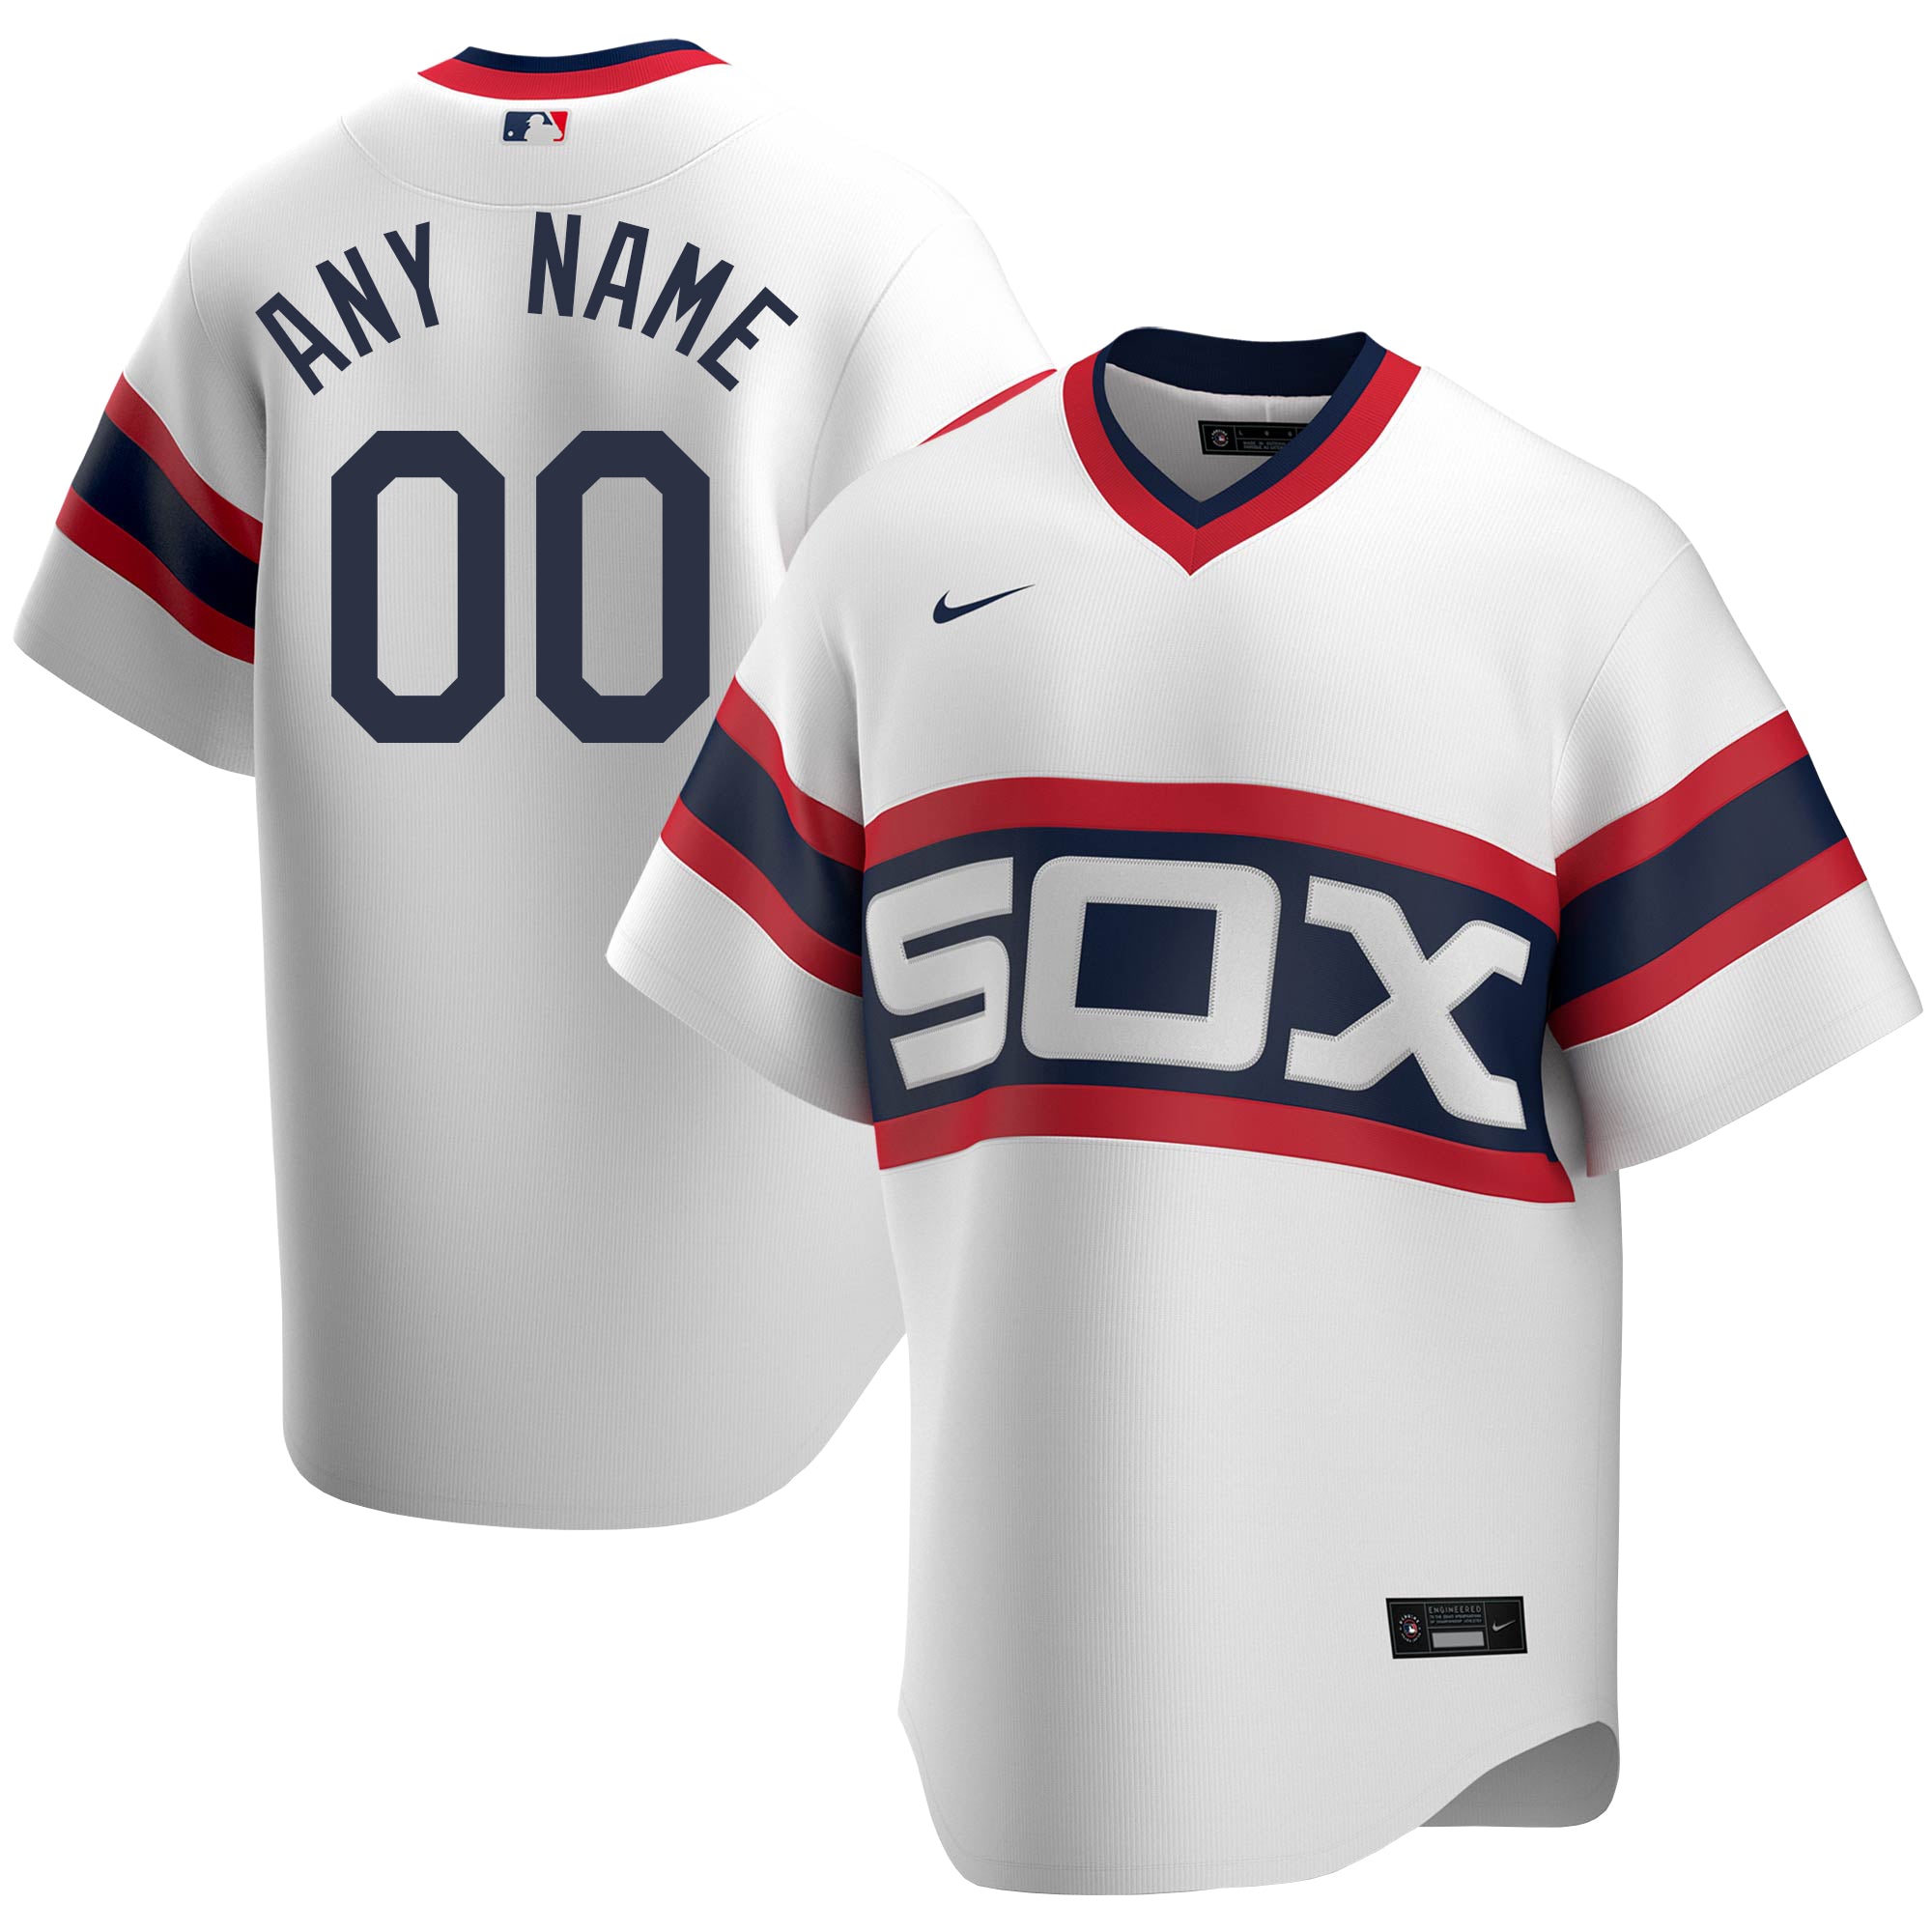 Nike Chicago White Sox 2022 MLB All Star Game Authentic Jersey Size Medium